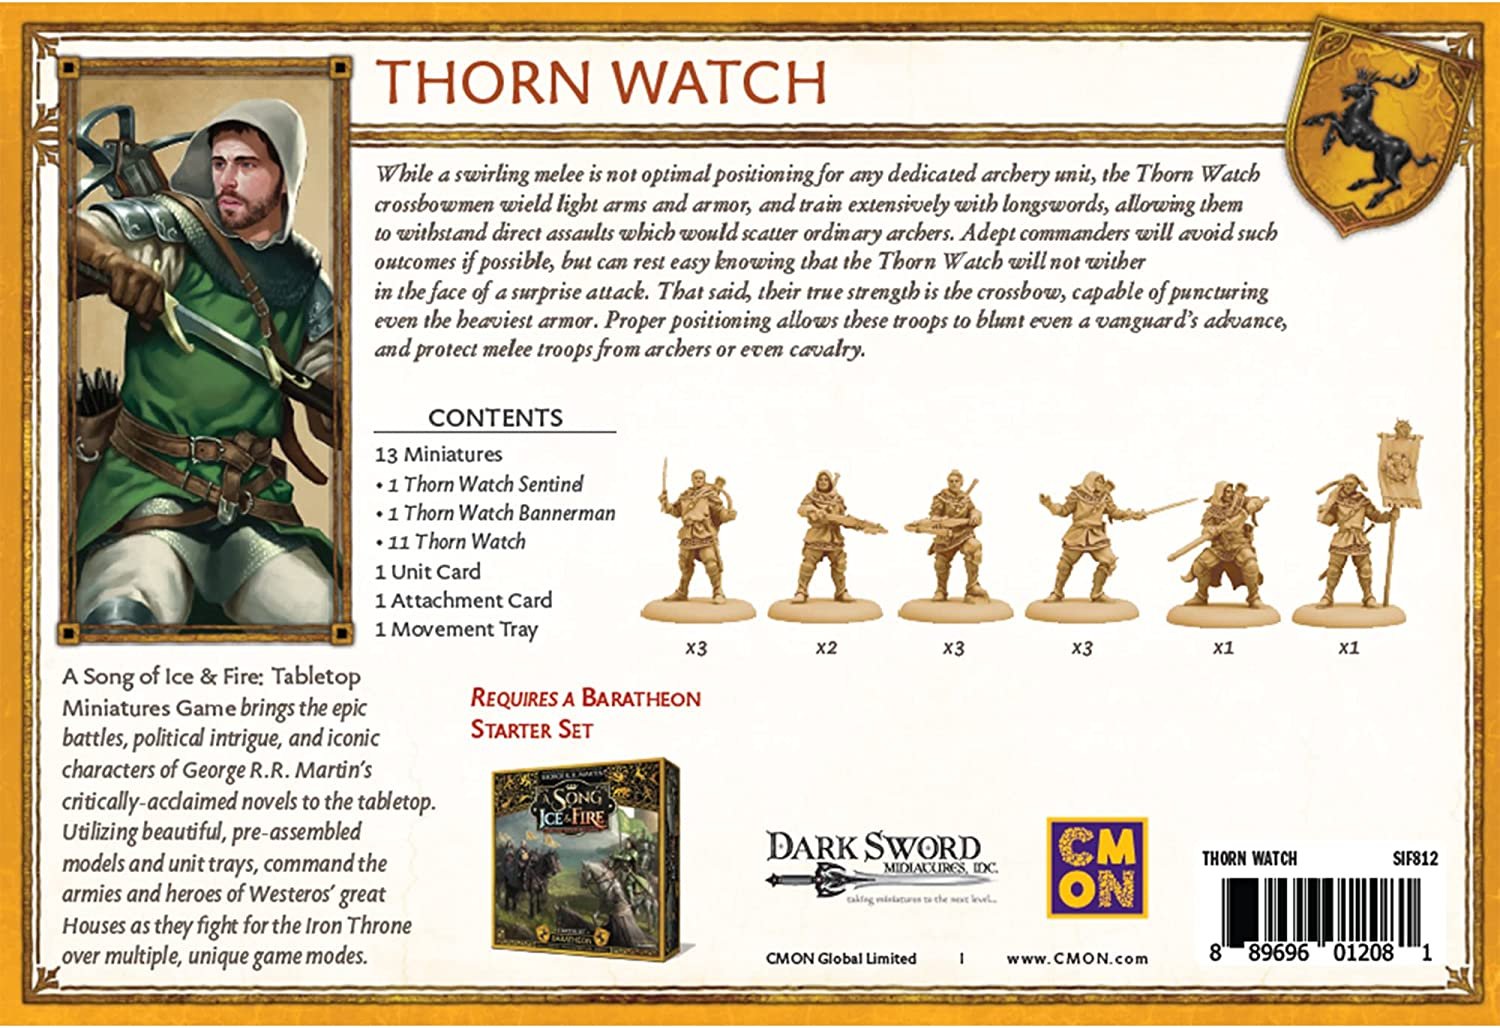 A Song of Ice and Fire - Baratheon: Thorn Watch